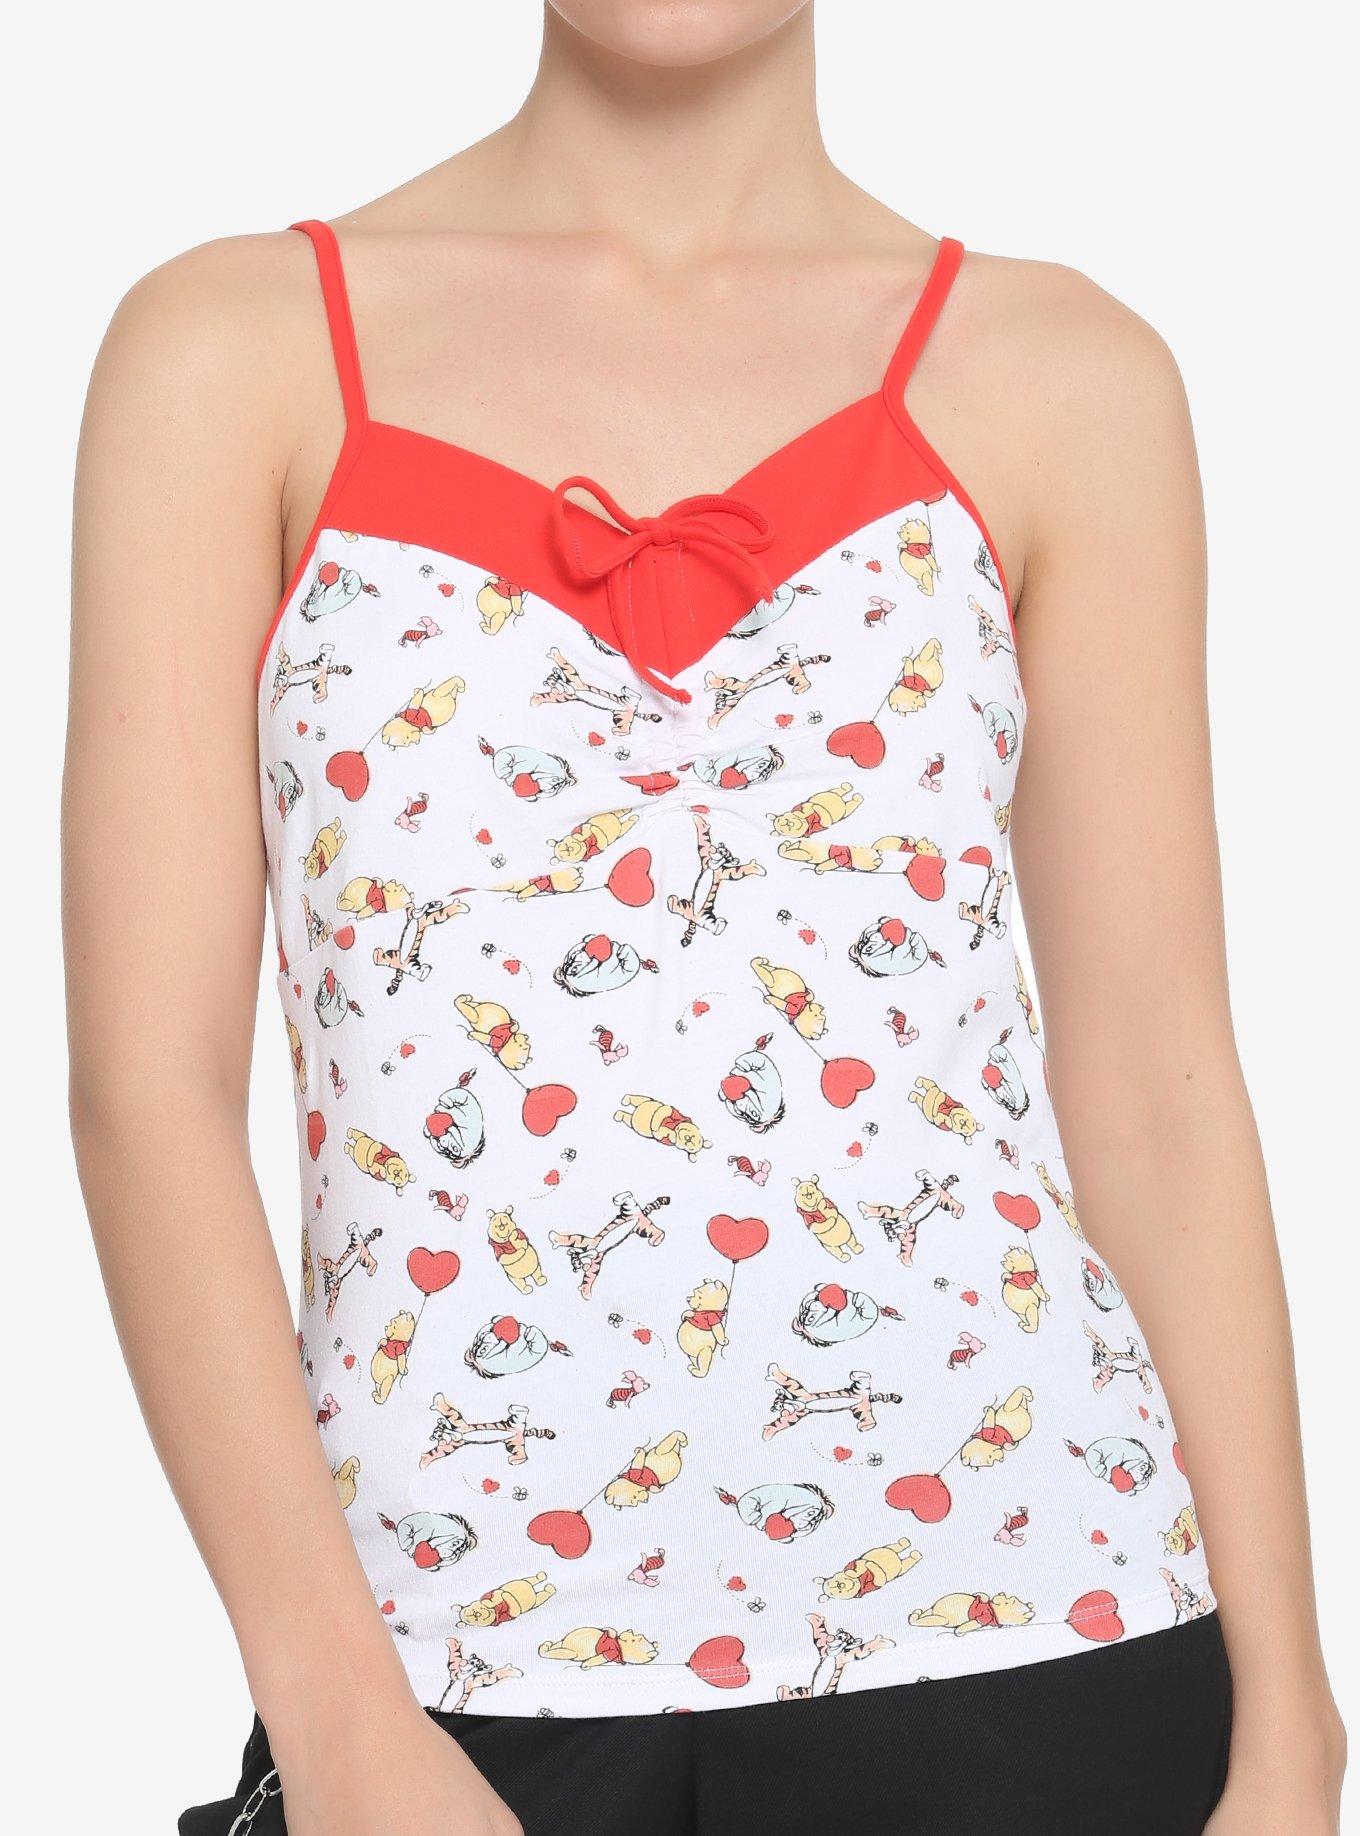 Her Universe Disney Winnie The Pooh Hearts Girls Strappy Tank Top, MULTI, hi-res